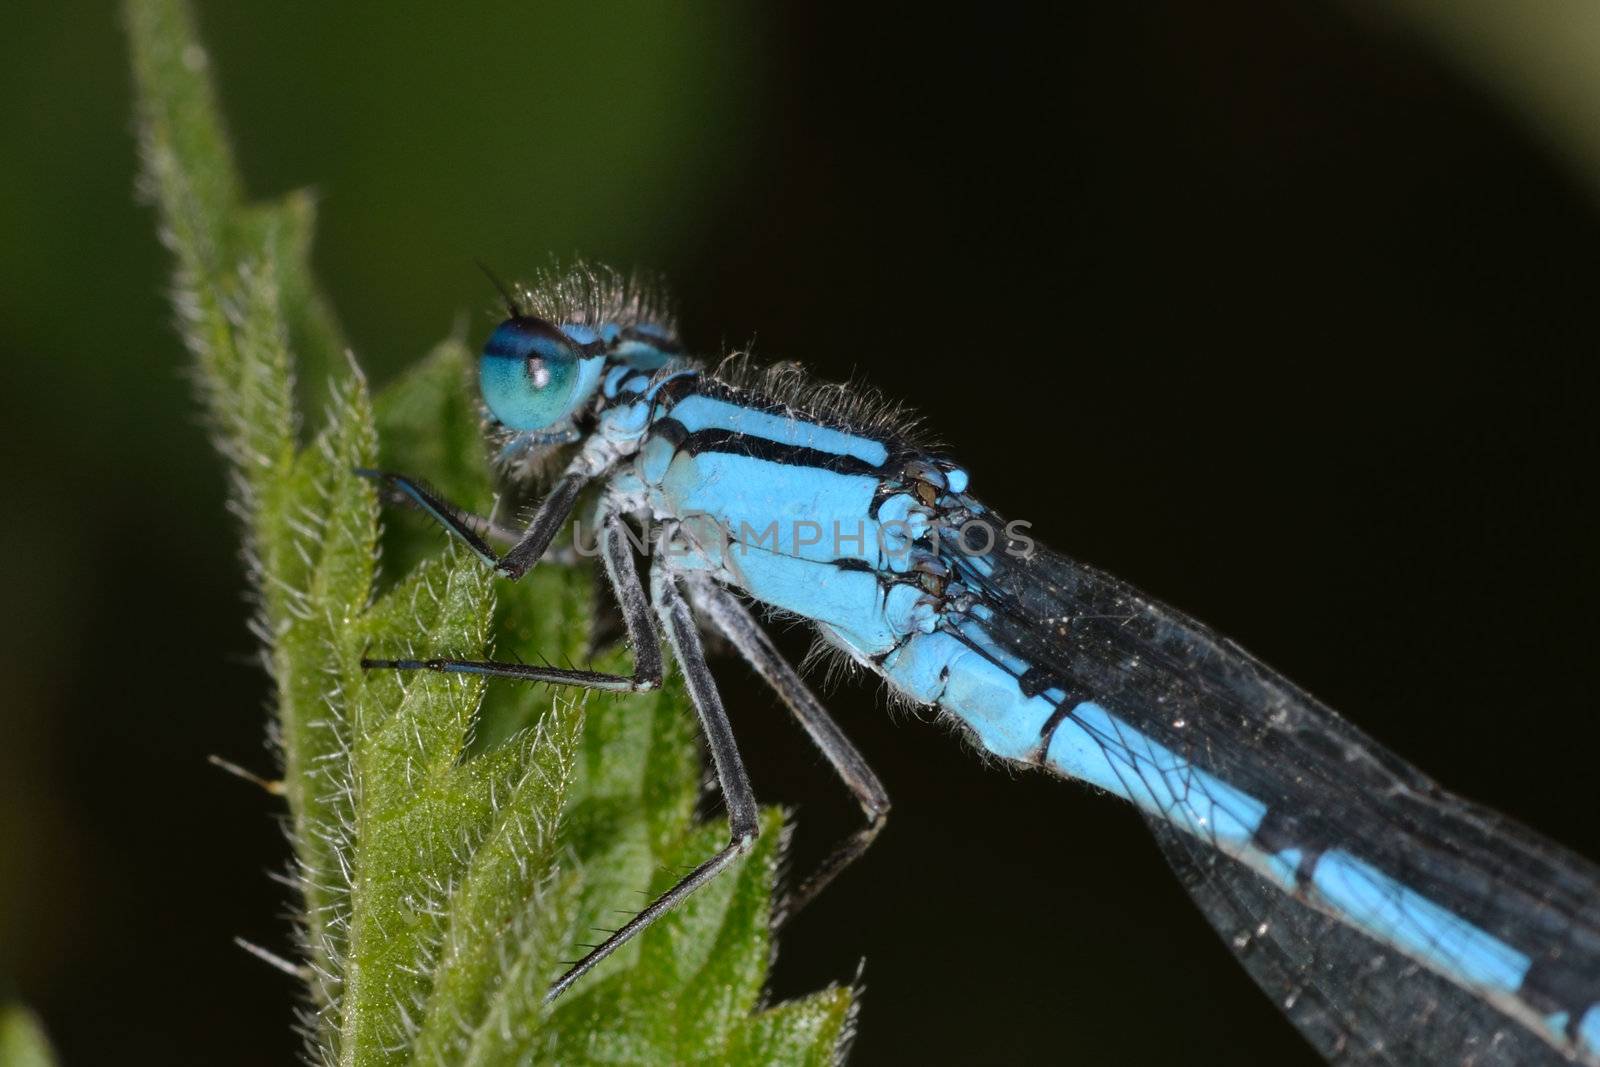 Close up of blue dragonfly on nettle leaf